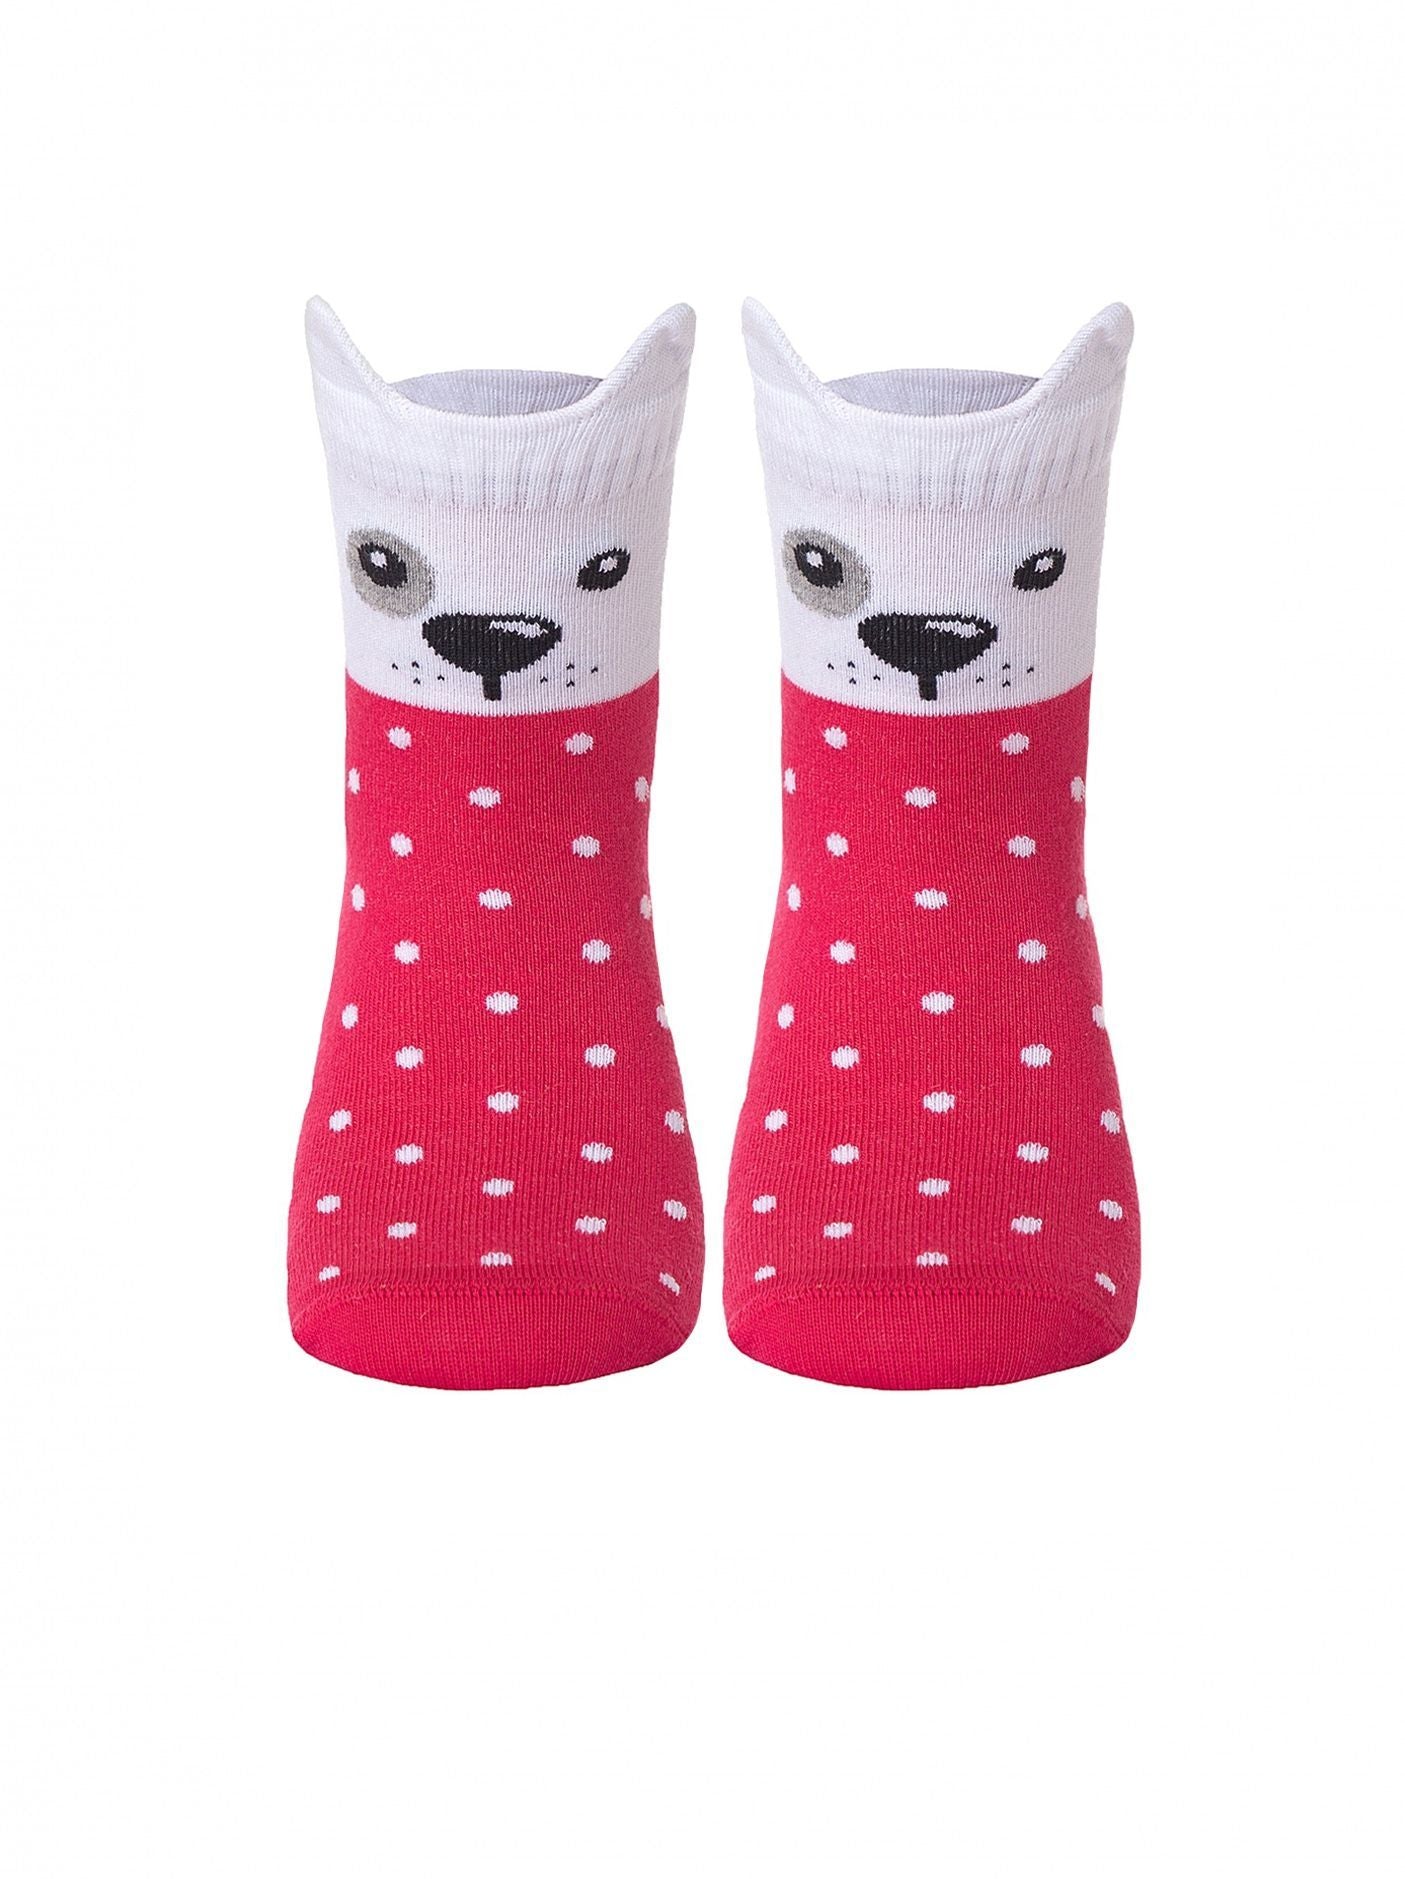 Polka dot cute baby socks with puppies by Conte-Kids